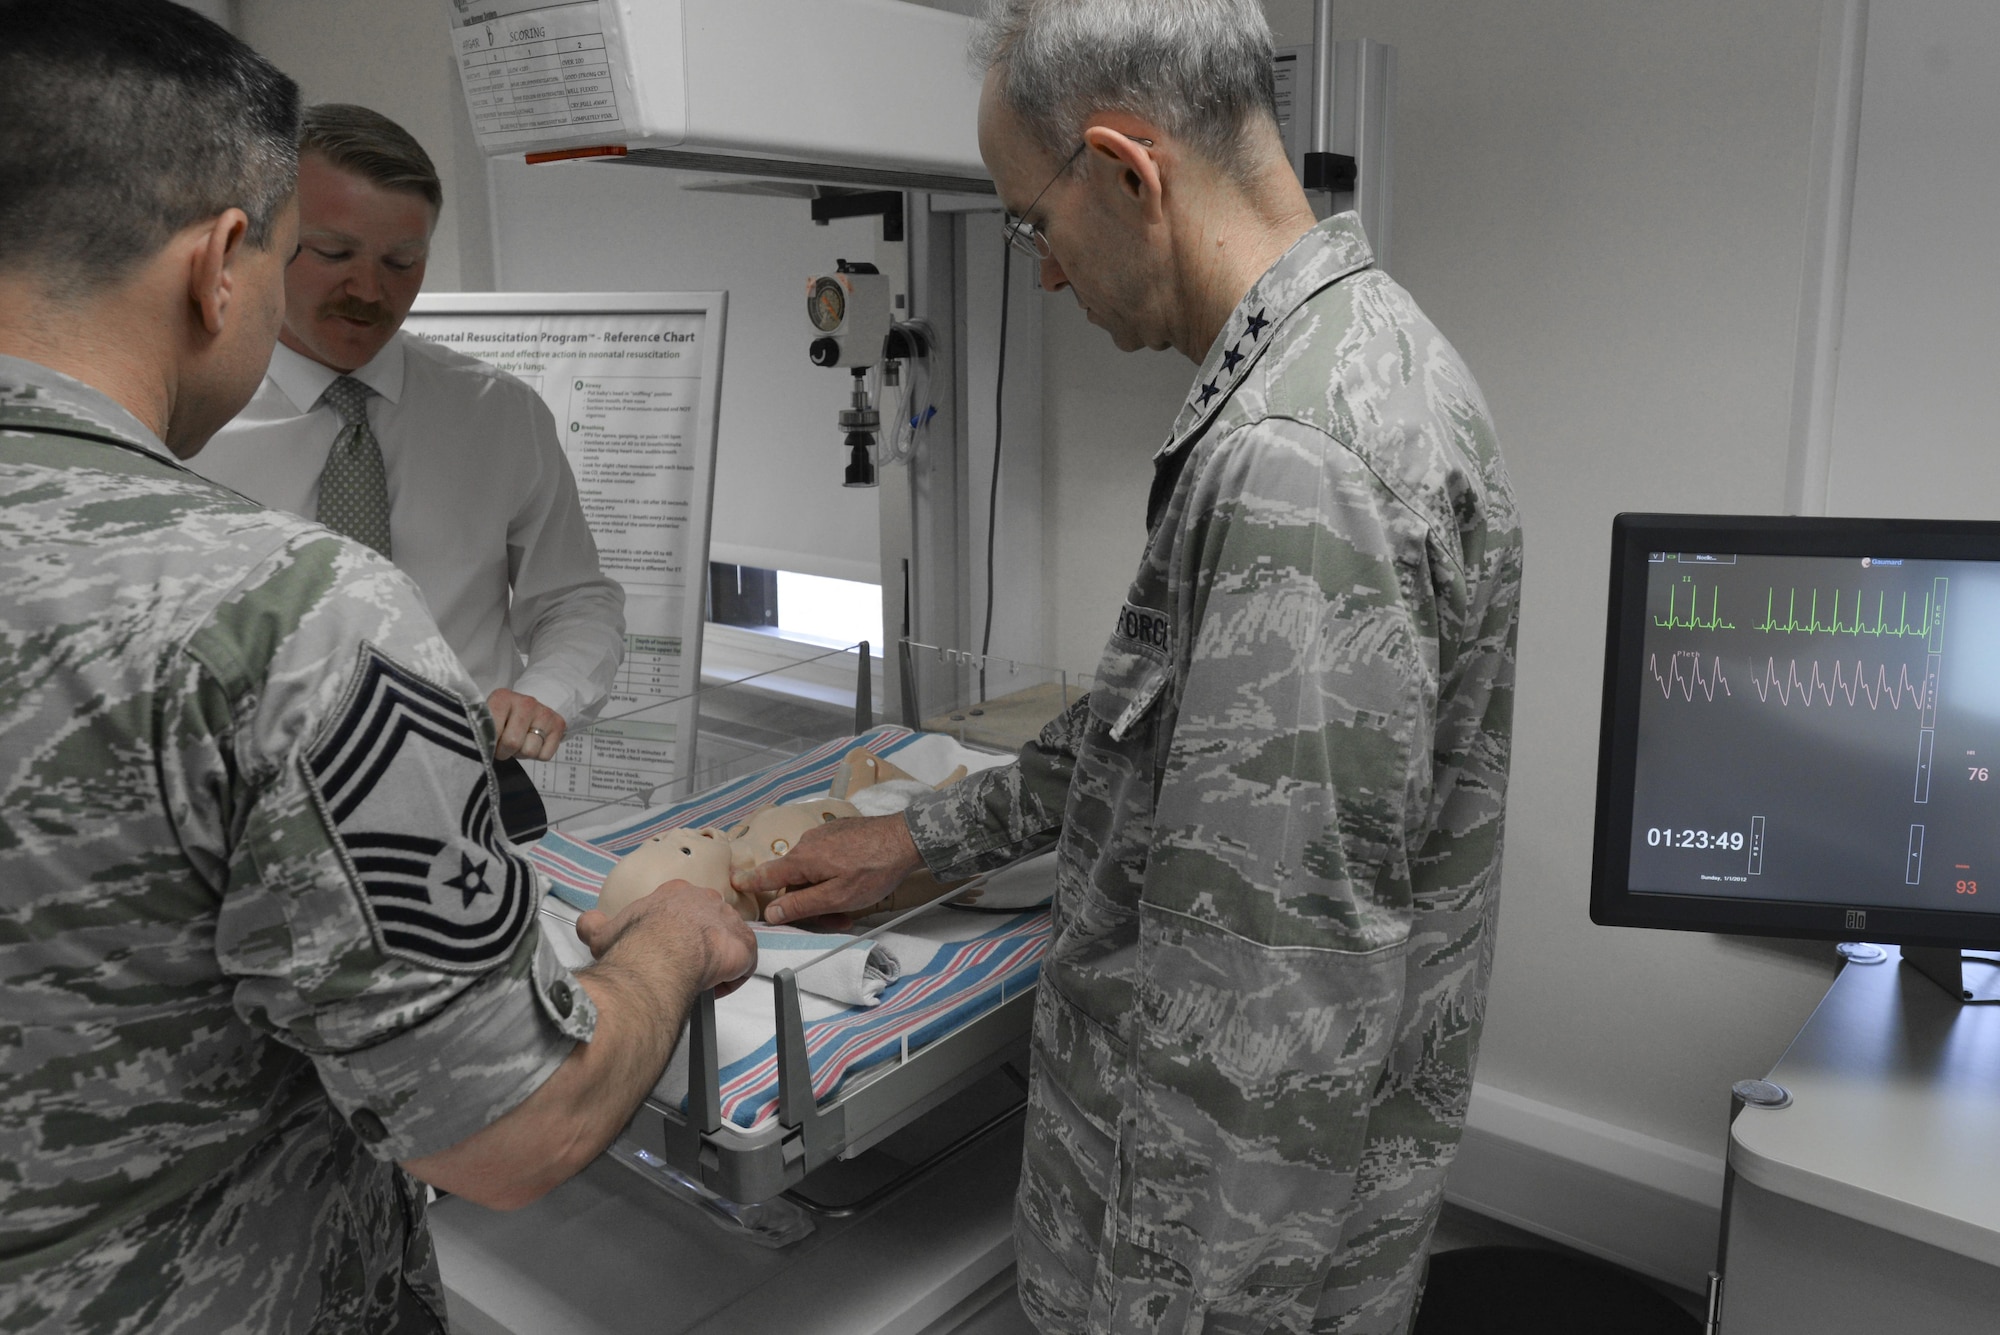 U.S. Air Force Lt. Gen. Mark A. Ediger, right, Surgeon General of the Air Force, and Chief Master Sgt. Jason E. Pace, left, Chief, Medical Enlisted Force, observe a newborn simulator at the 48th Medical Group’s simulation center at Royal Air Force Lakenheath, England, July 25. The newborn simulator allows the 48th MDG to train doctors and nurses on a range of different situations involving newborn children. (U.S. Air Force Photo by Airman Eli Chevalier)